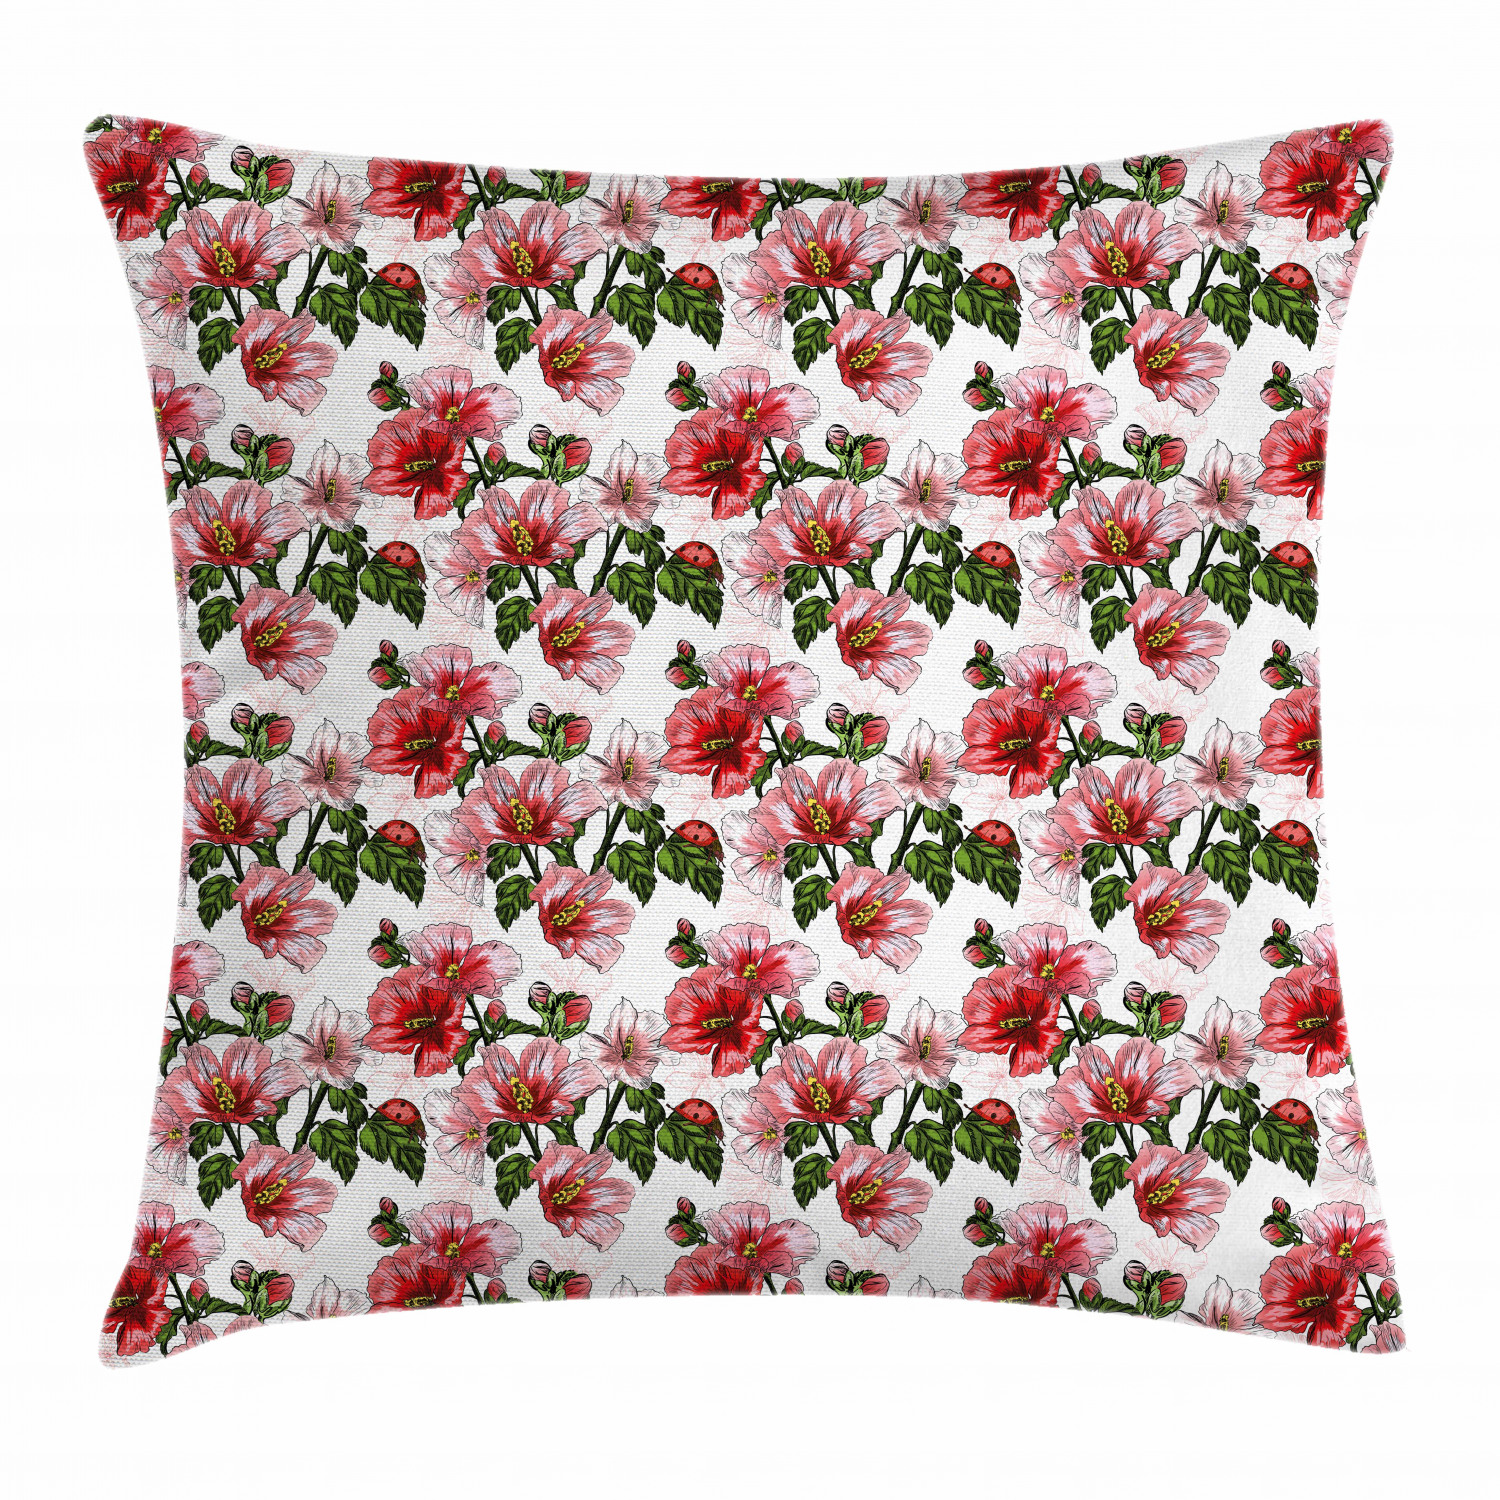 Ladybugs Throw Pillow Cases Cushion Covers Home Decor 8 Sizes by Ambesonne